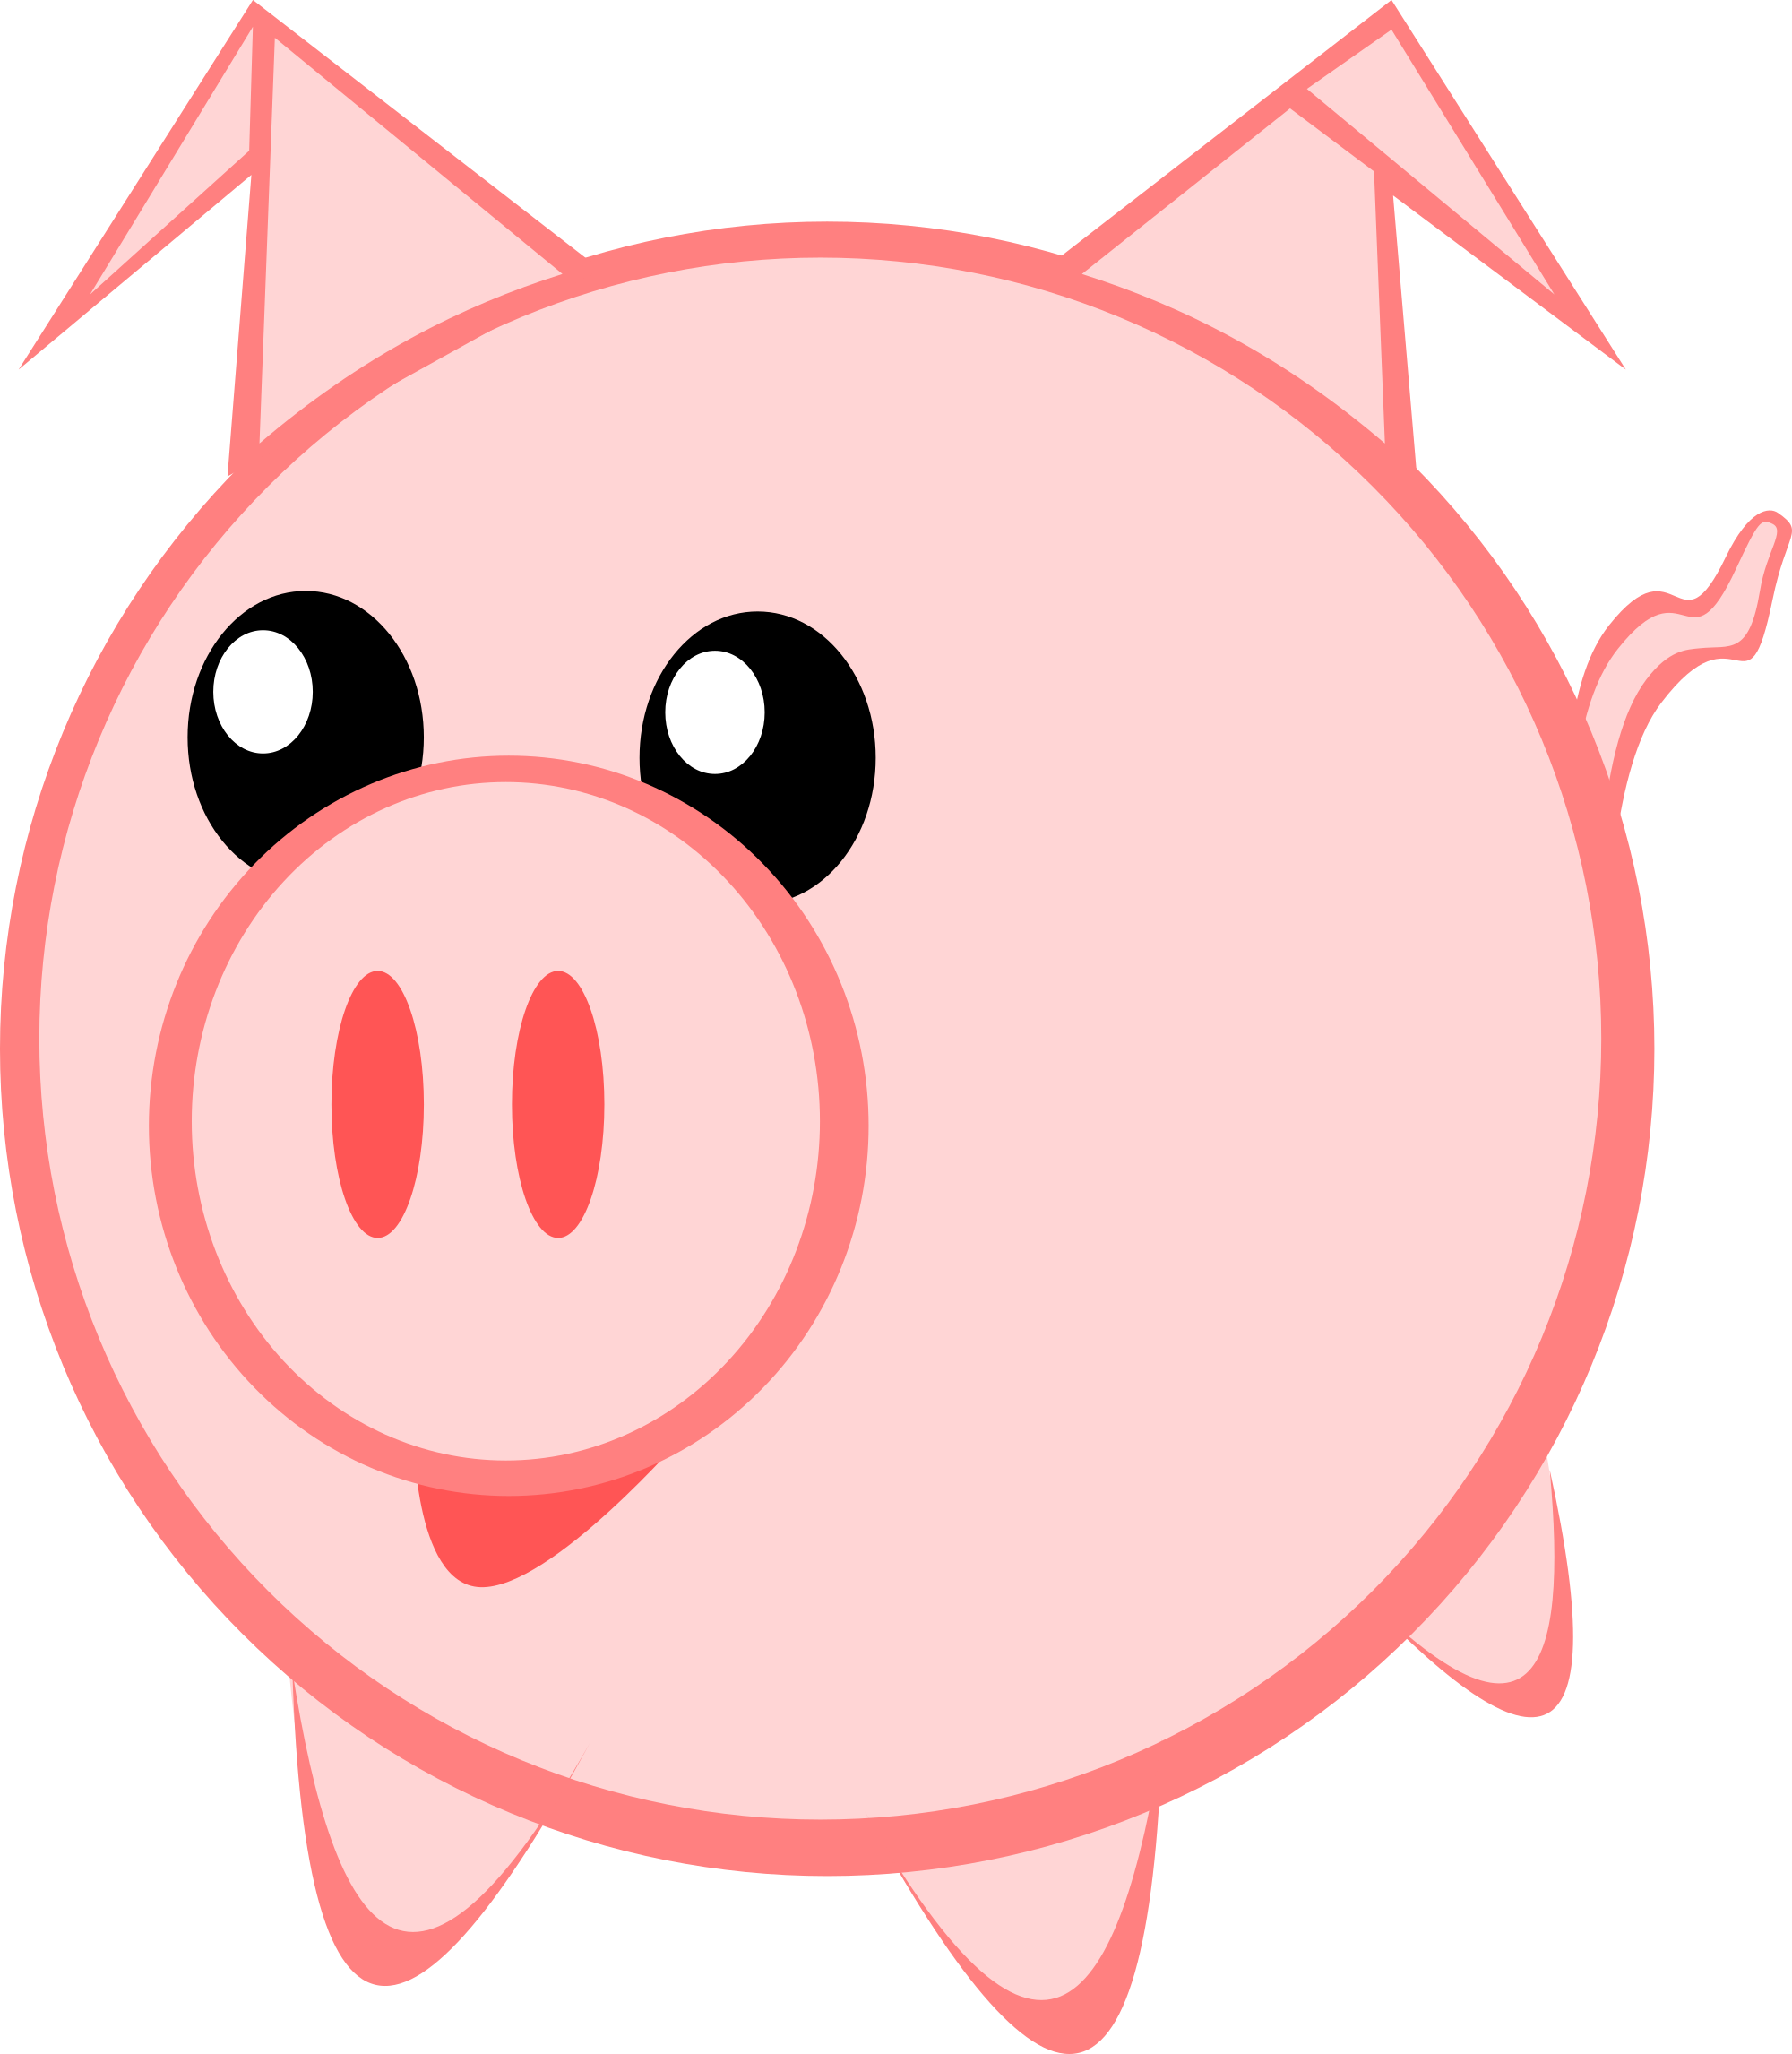 Free pigs clipart and vector images